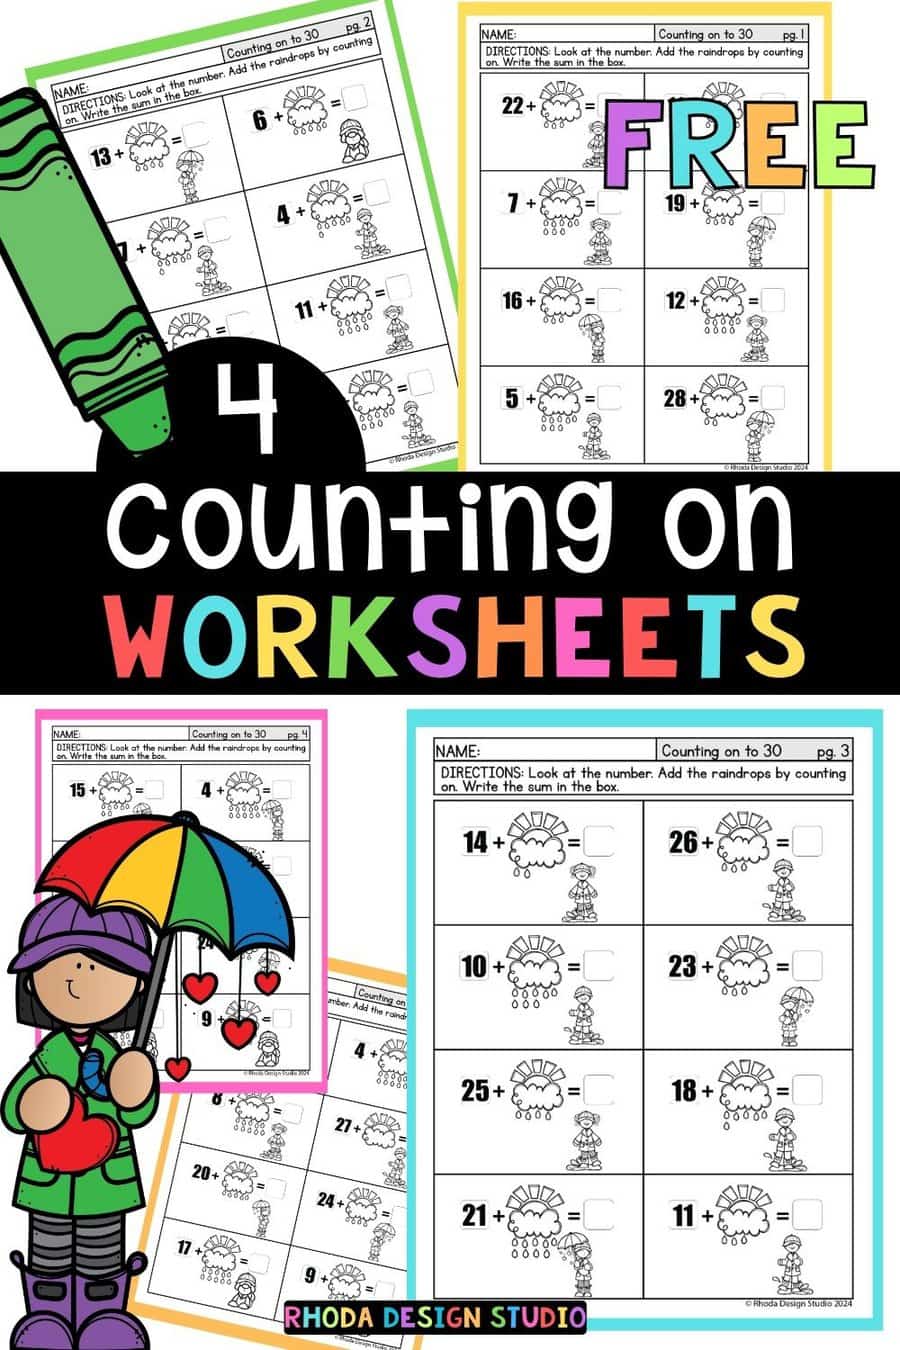 Free Counting on Worksheets: Adding Skills